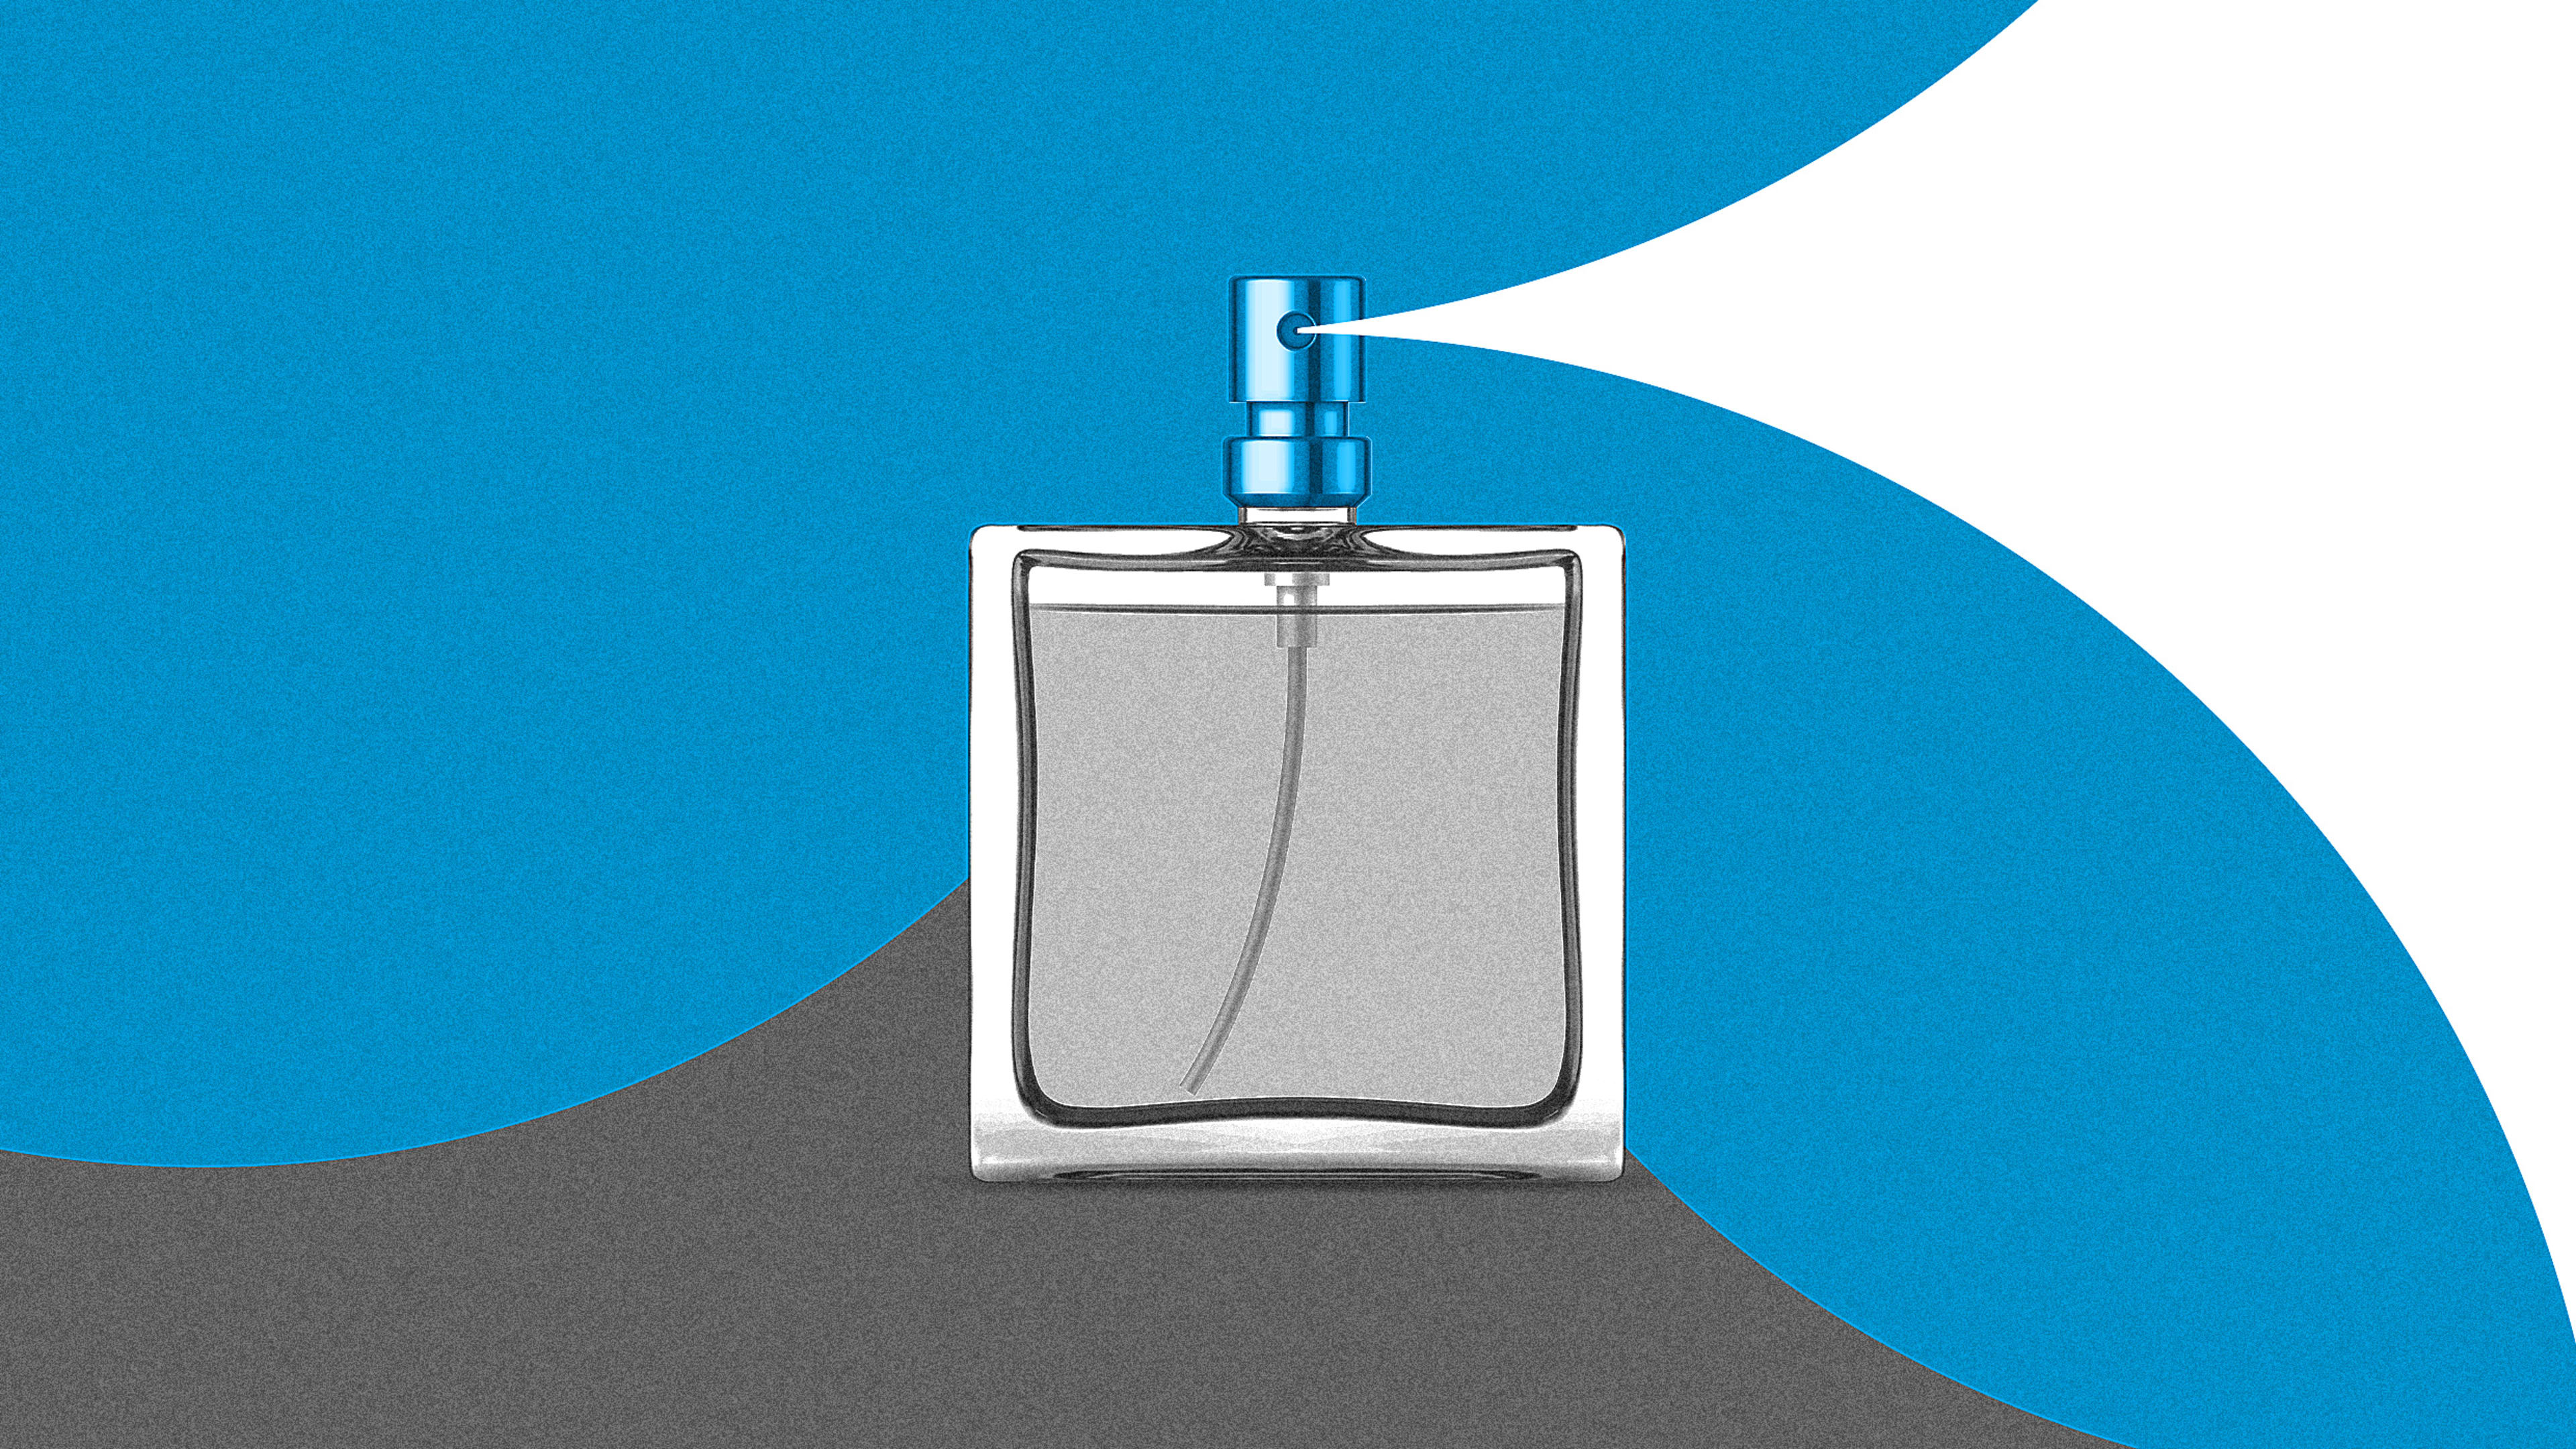 These new fragrances will be made from carbon captured from the atmosphere